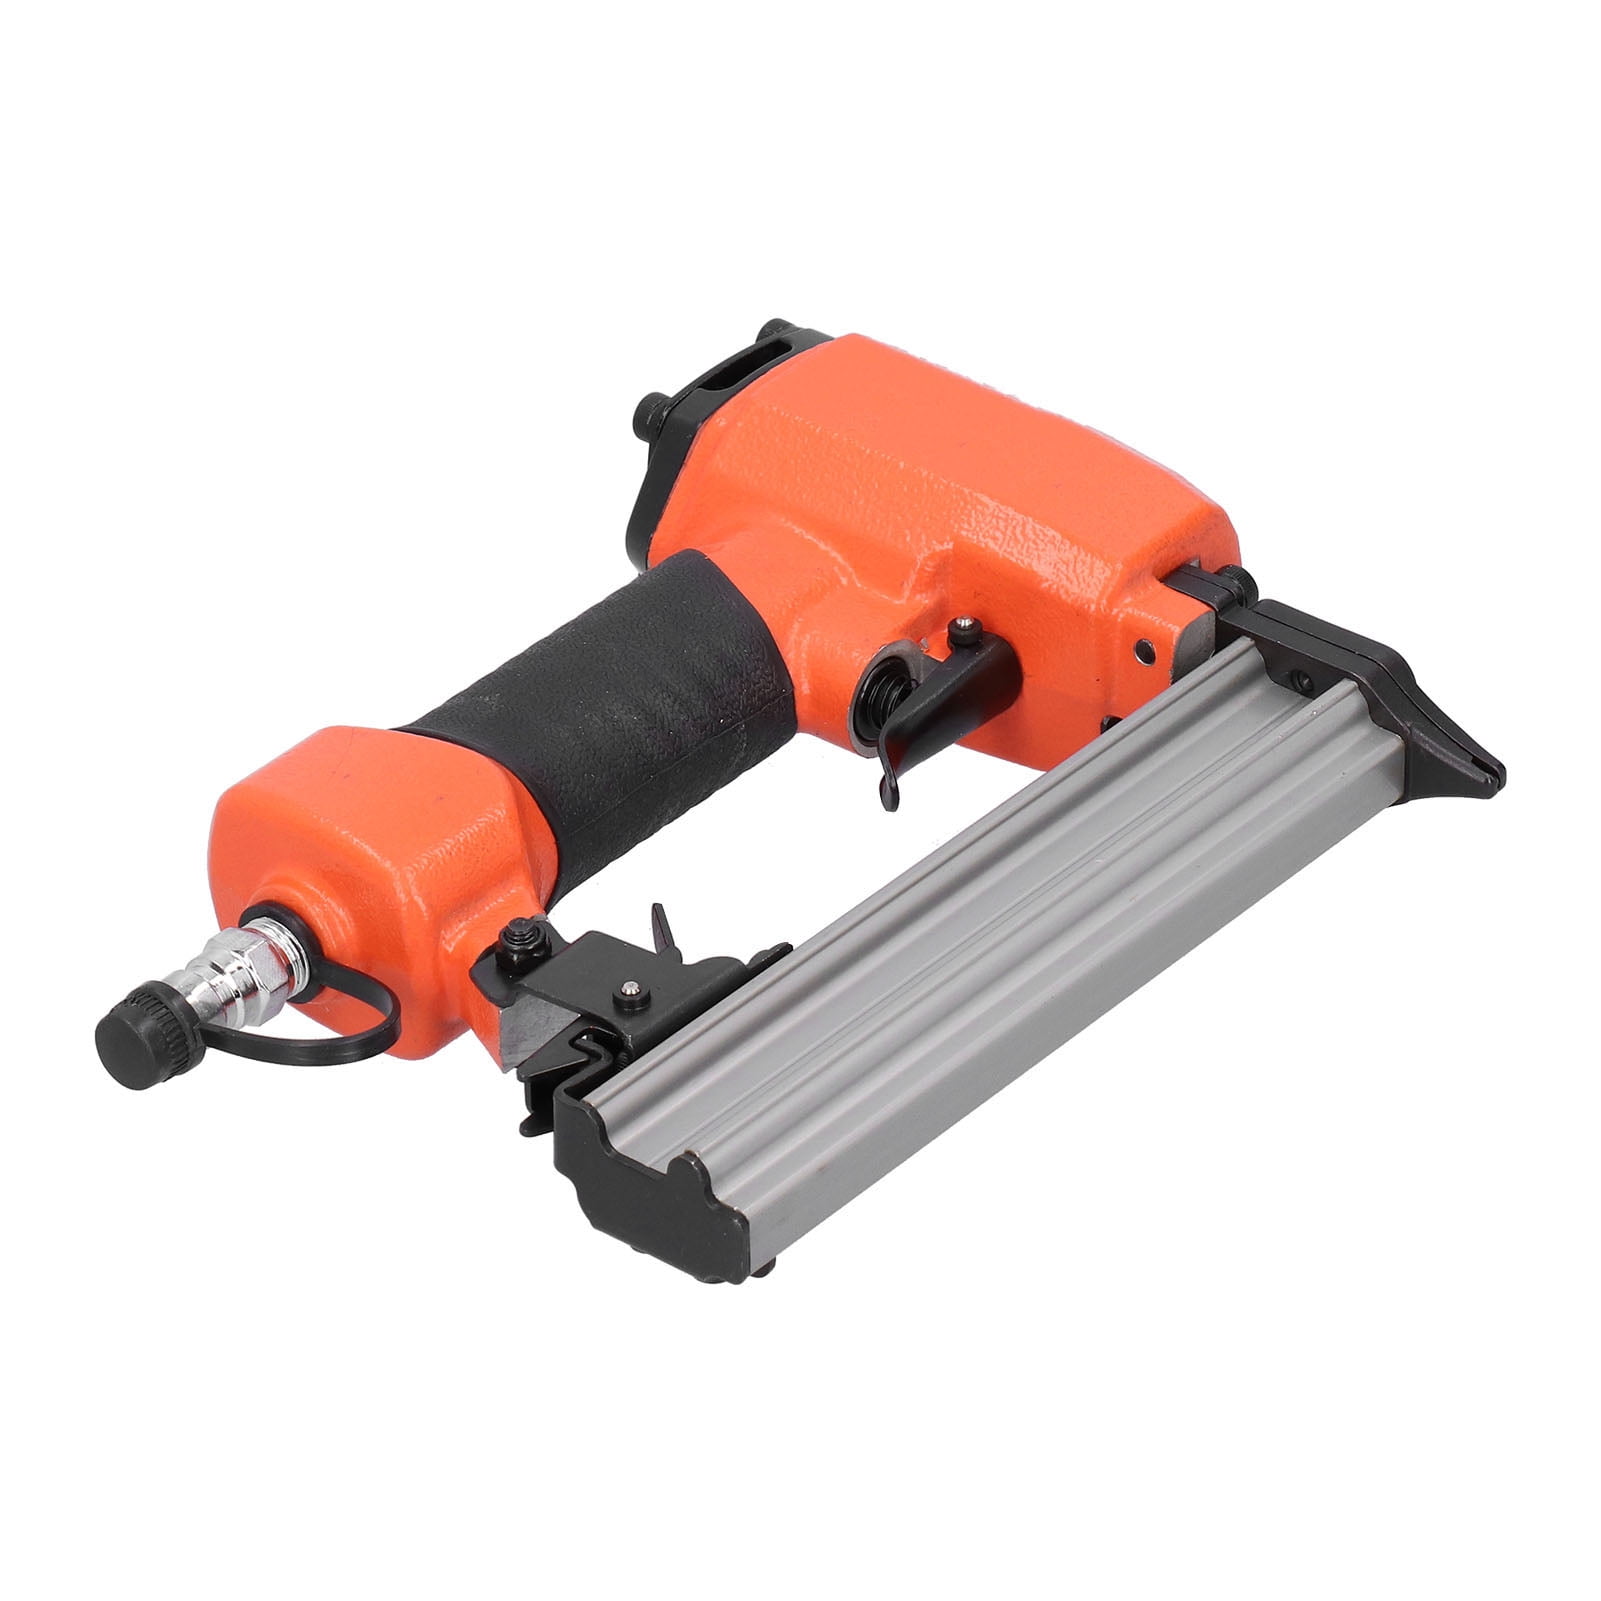 Details about   New Pneumatic NailGun Woodworking Narrow Crown Stapler Alloy Steel Nailing Tool 